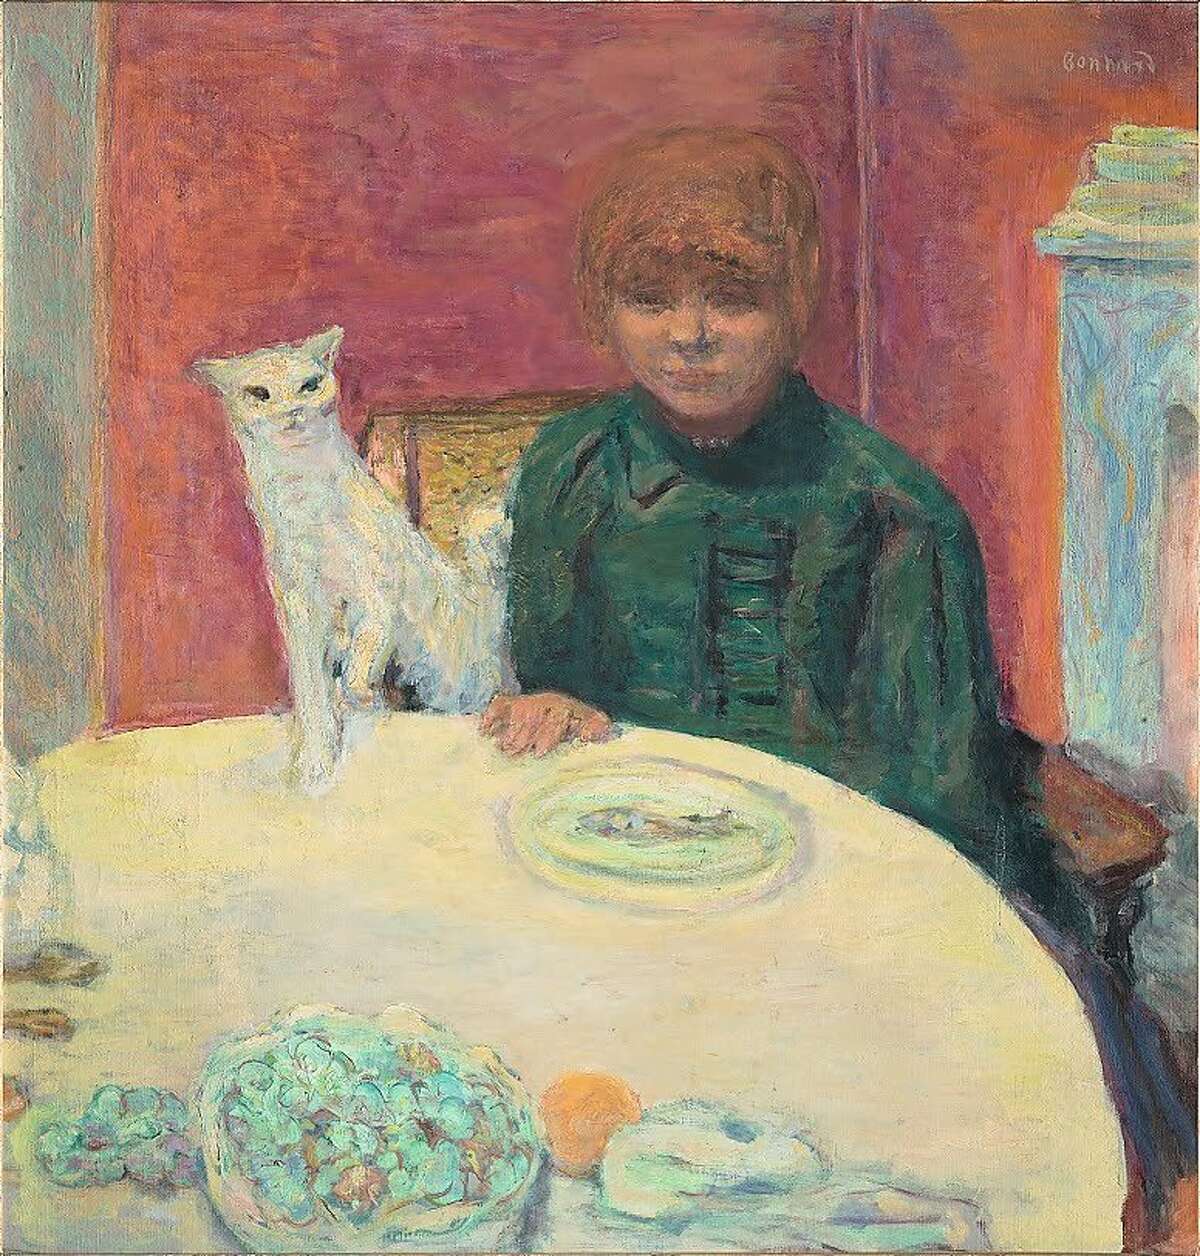 Pierre Bonnard, "Woman with a Cat, or The Demanding ￼Cat" (1912). ￼